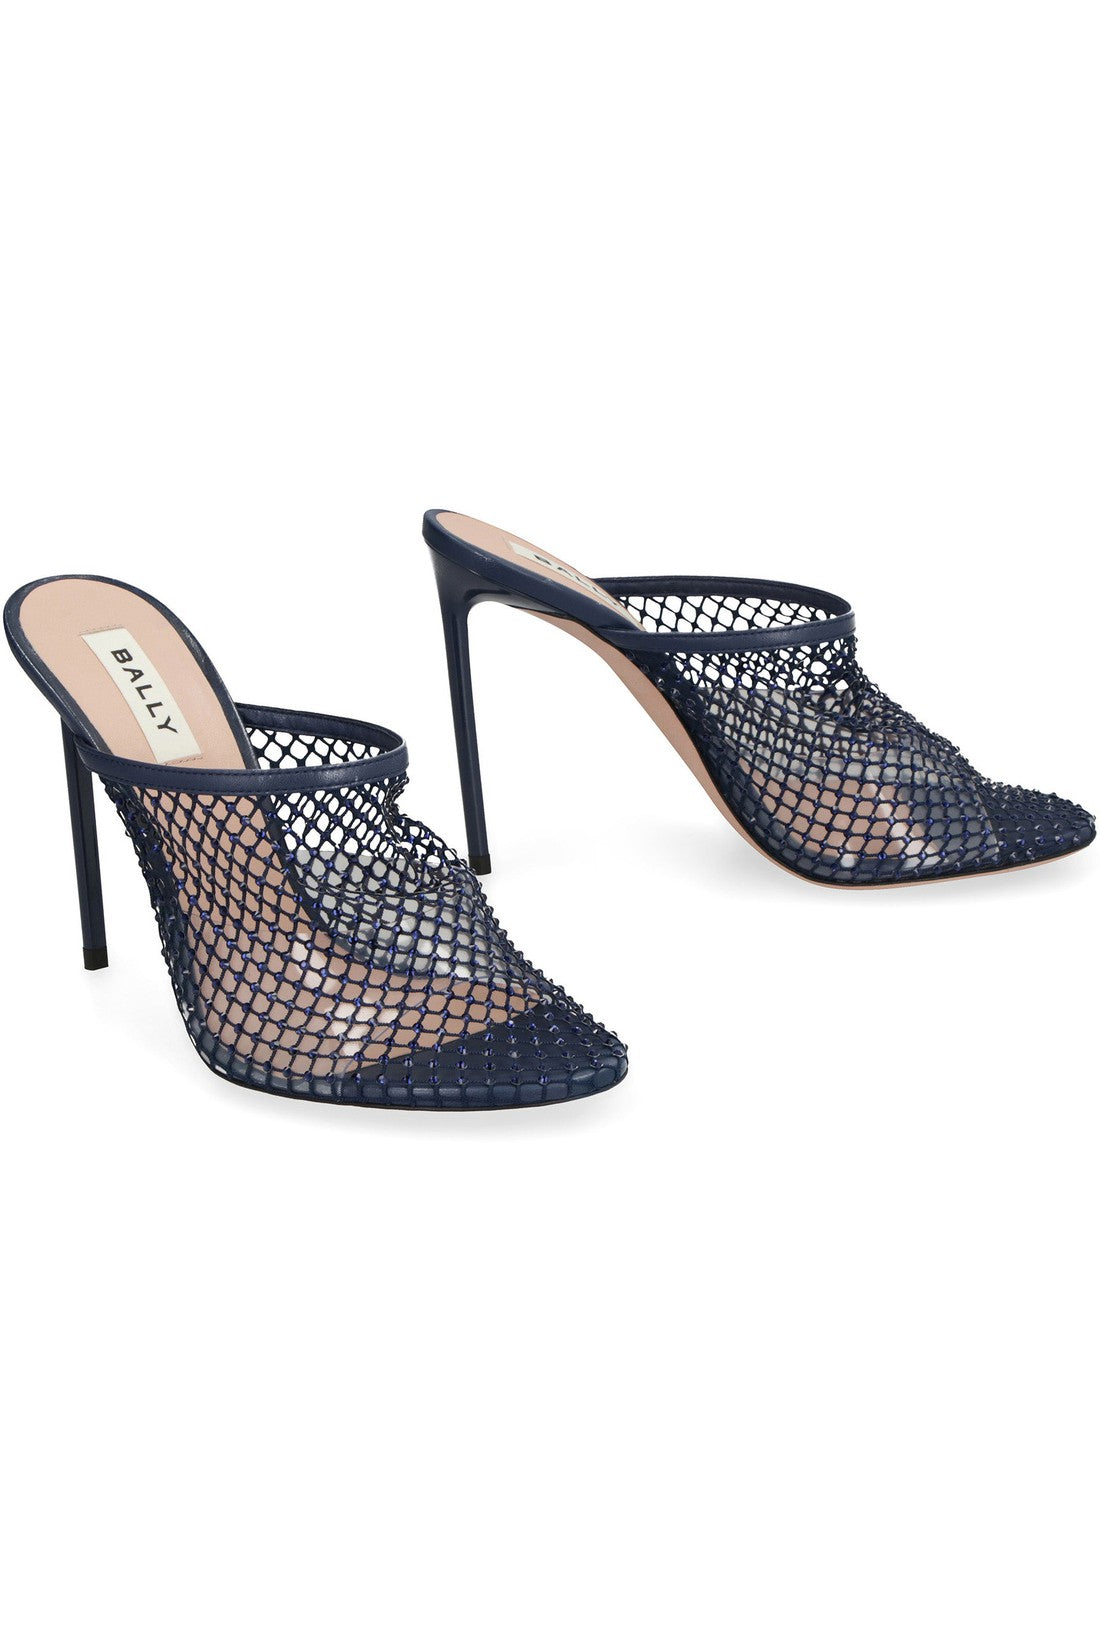 Bally-OUTLET-SALE-Crystal Fishnet leather mules-ARCHIVIST